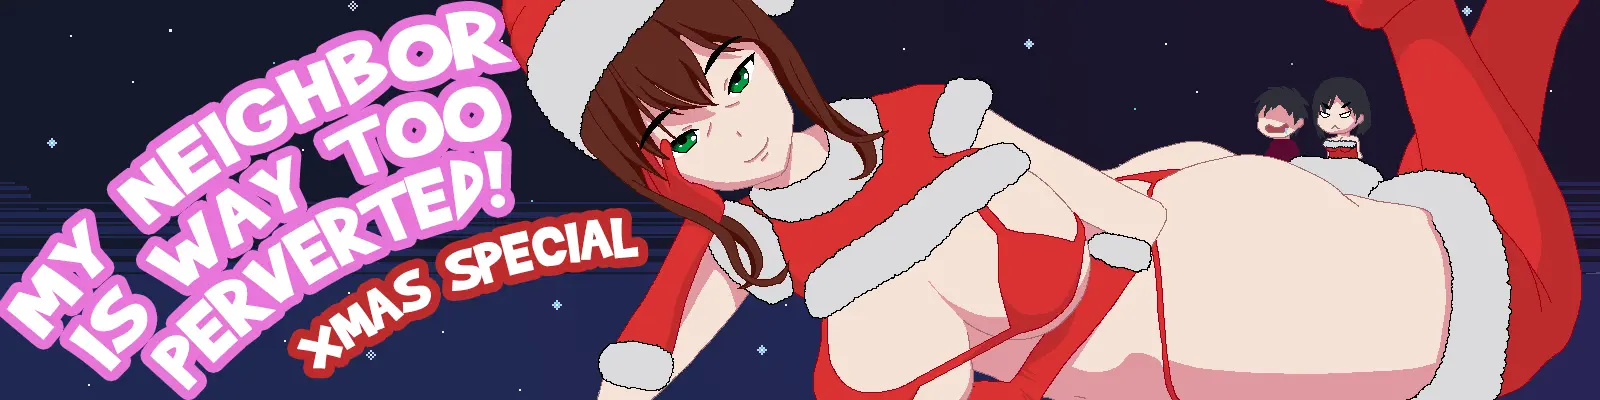 My Neighbor Is Way Too Perverted! Christmas Special main image